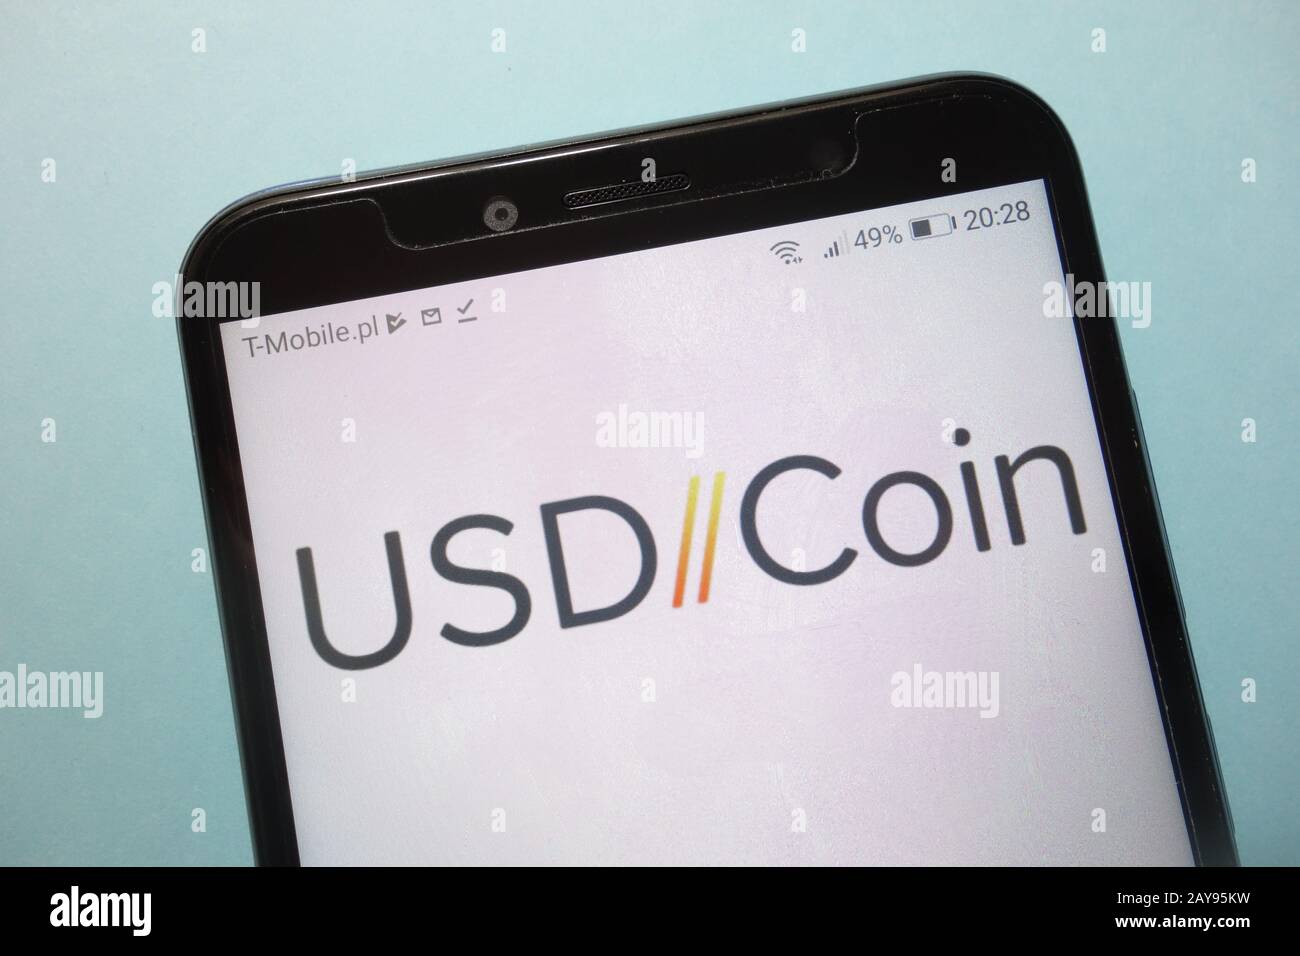 USD Coin (USDC) cryptocurrency logo displayed on smartphone Stock Photo